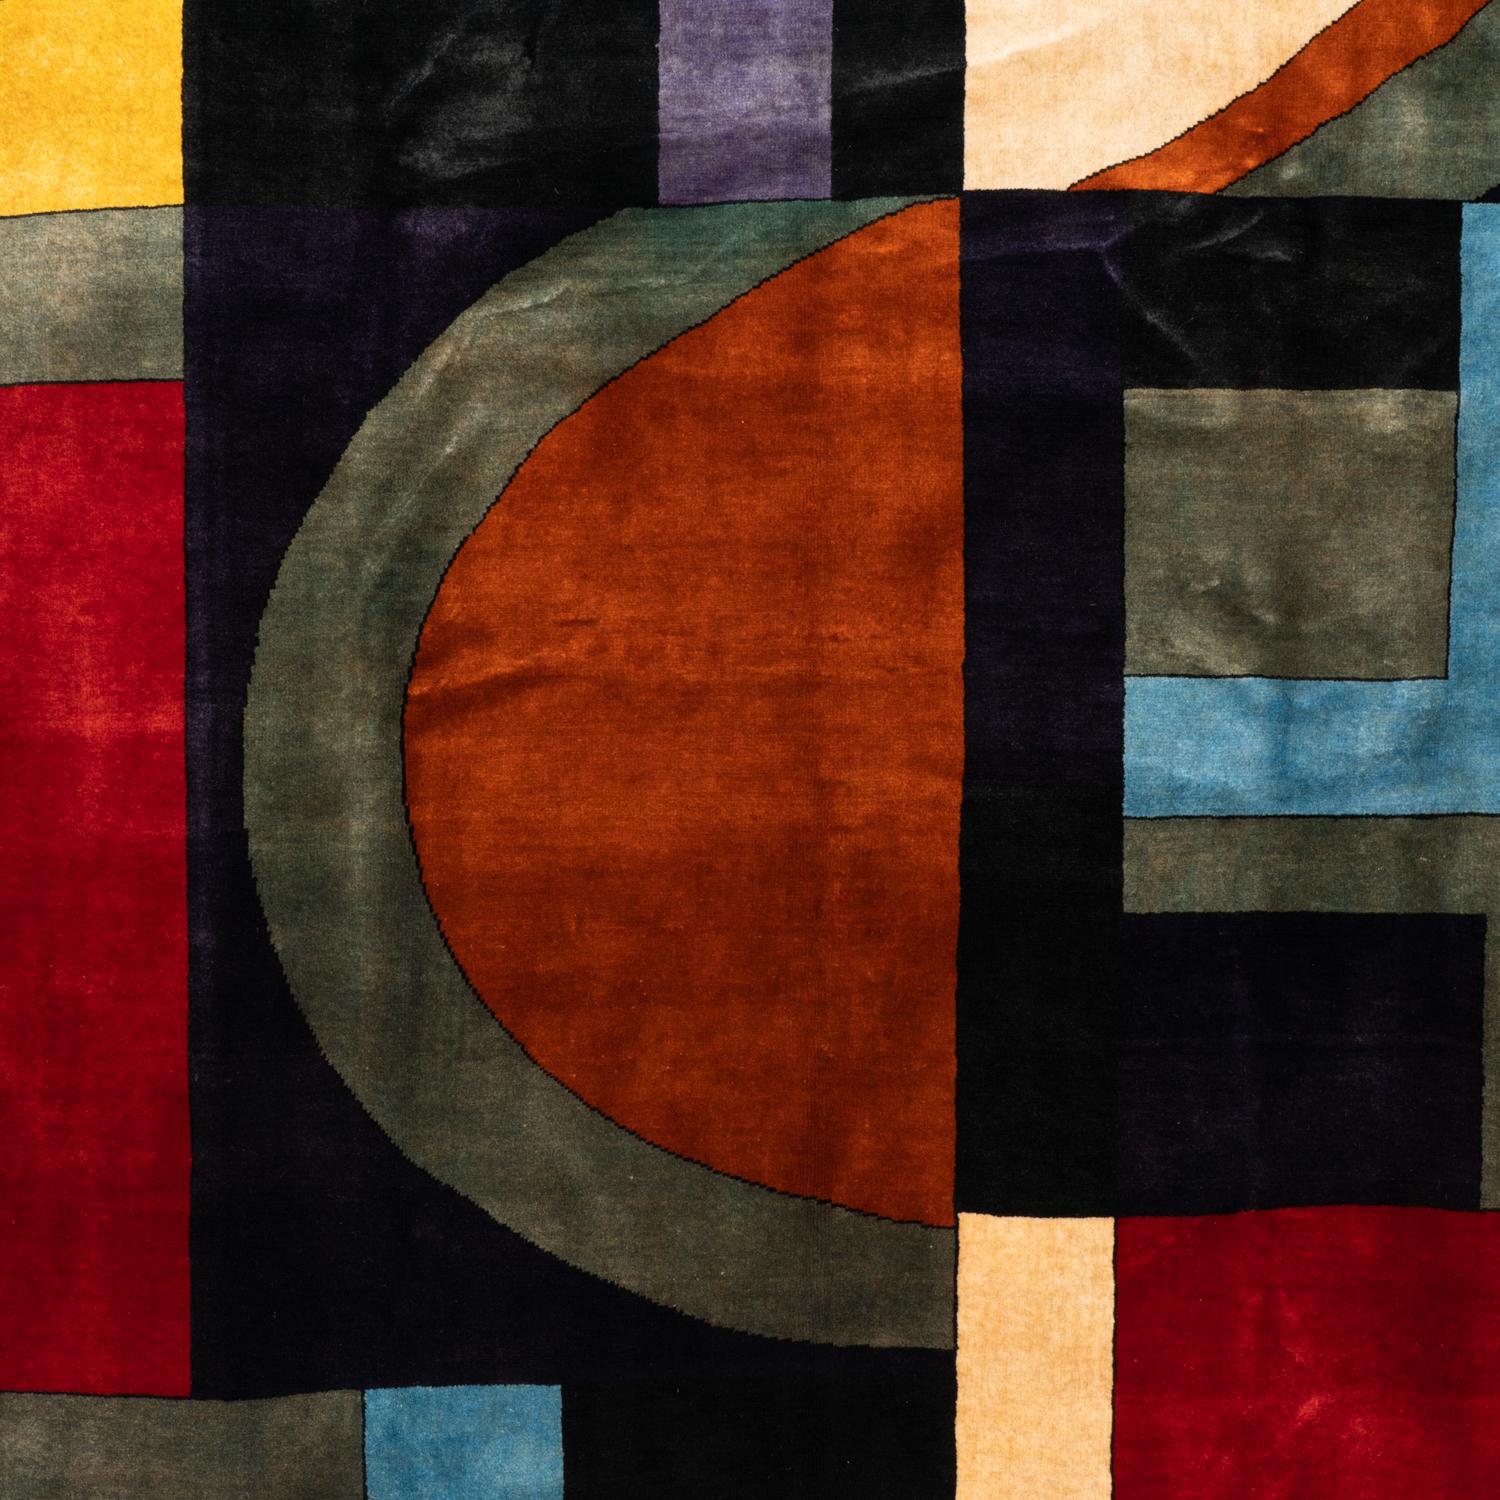 Rug, or tapestry, inspired by Sonia Delaunay, representing geometric shapes in blue, red, yellow, beige and black tones. Hand-knotted and in Merino wool. Can be installed on the floor or displayed on the wall.

Contemporary work of craftsmen.

On